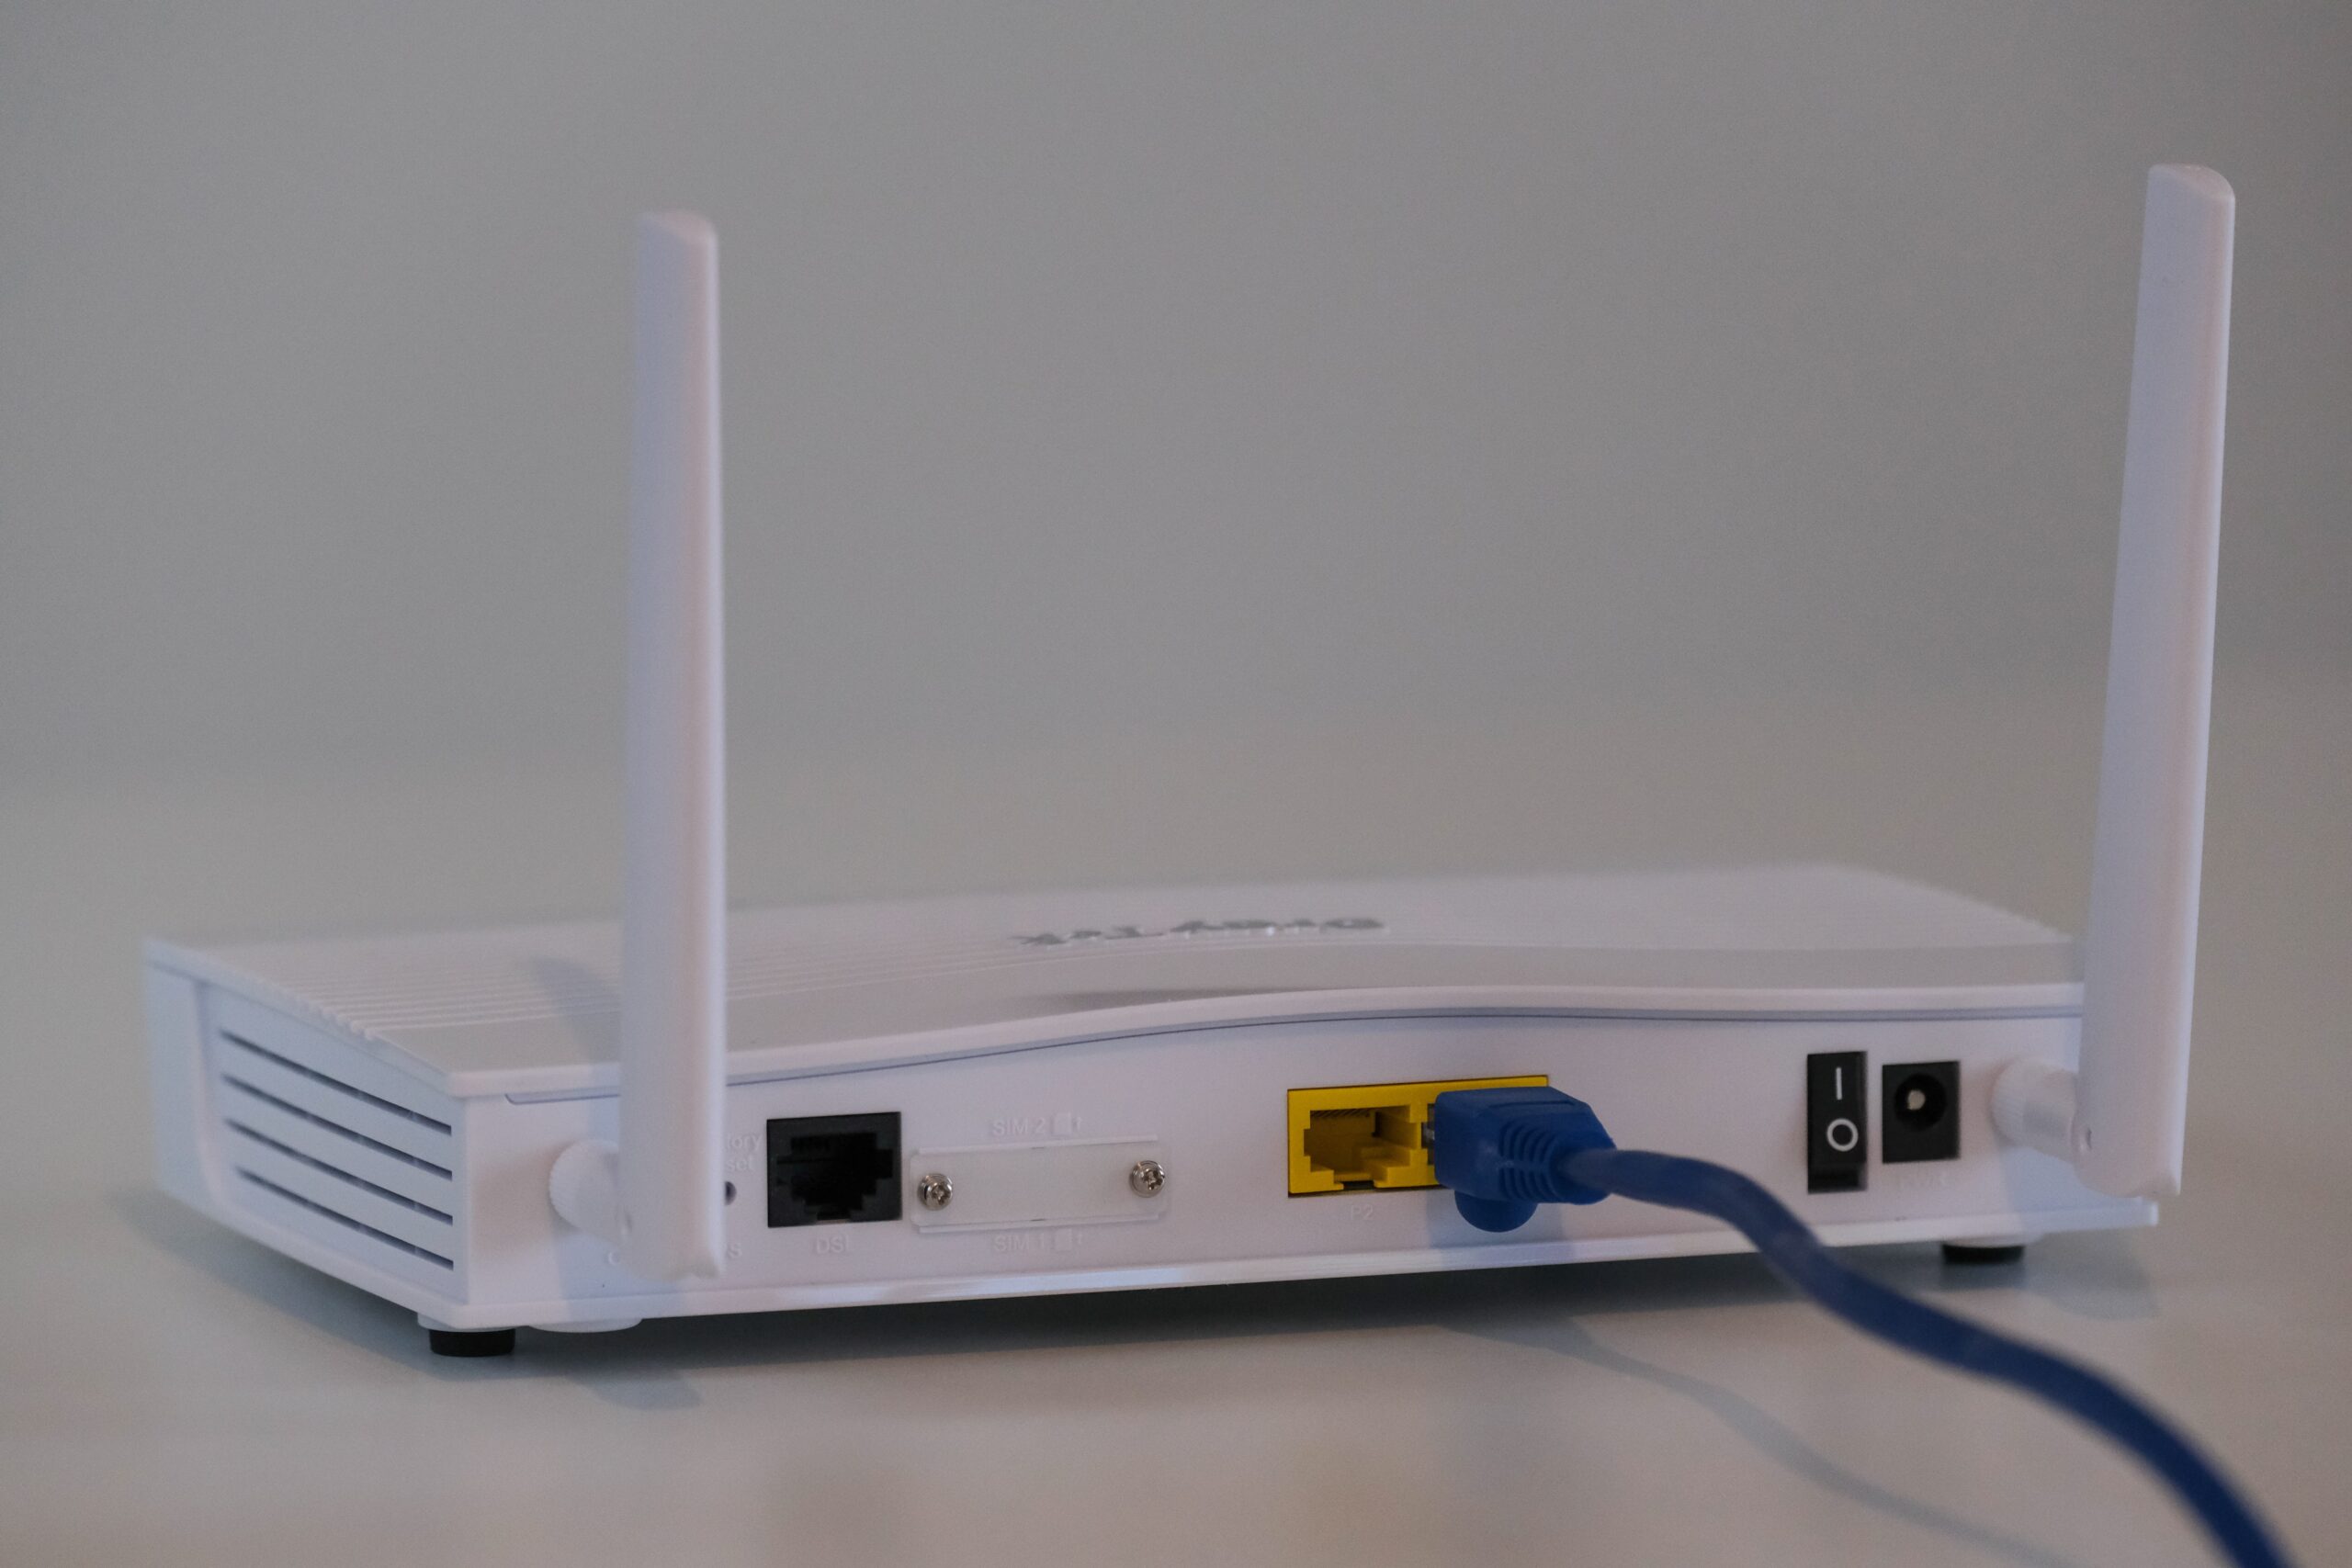 Is It Safe To Sit Next To A Wireless Router?